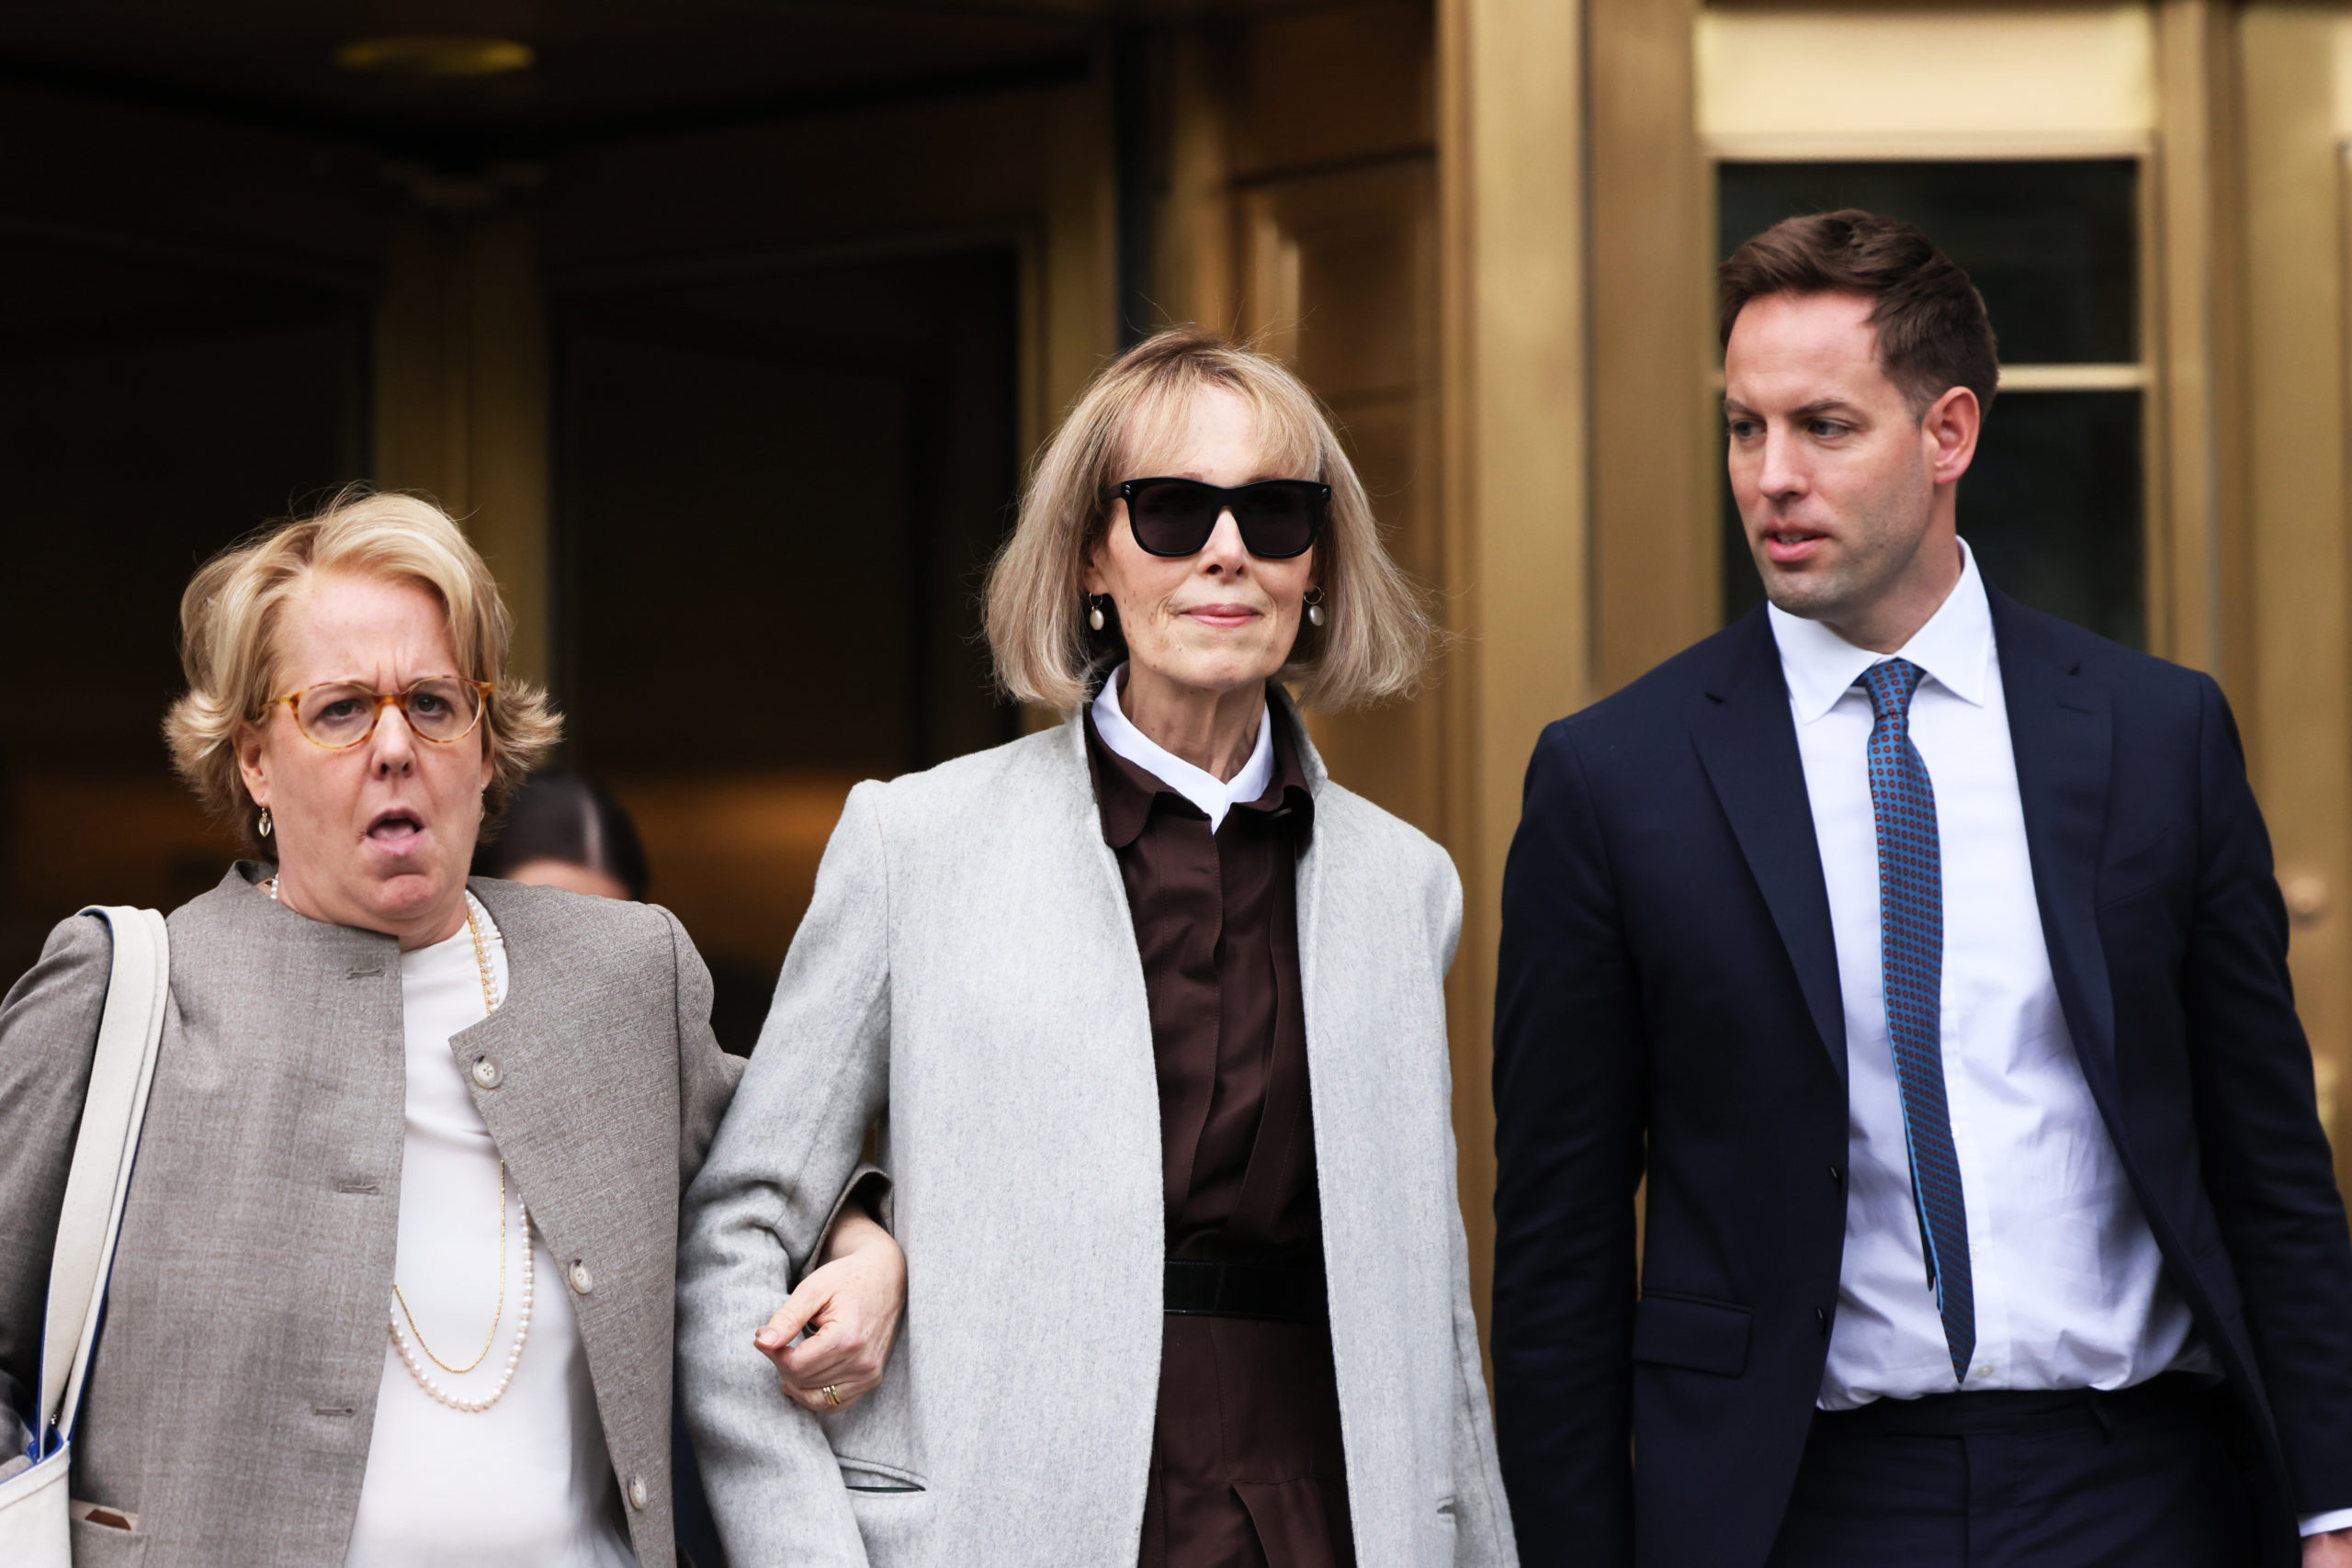 NEW YORK, NEW YORK - APRIL 25: Magazine Columnist E. Jean Carroll leaves after the first day of her civil trial against former President Donald Trump at Manhattan Federal Court on April 25, 2023 in New York City. Jury selections begin in the Carroll civil trial against the former president, which she alleges attacked and sexually assaulted her in a dressing room of a luxury department store in the 1990s. The lawsuit comes after the passage of the Adult Survivors Act, a 2022 New York law that gave a one-year window beginning in November of that year for people to sue their alleged assailants even if the statute of limitations had expired, which had happened in Carroll’s case. The former president has stated that this never happened and has denied meeting her. (Photo by Michael M. Santiago/Getty Images)